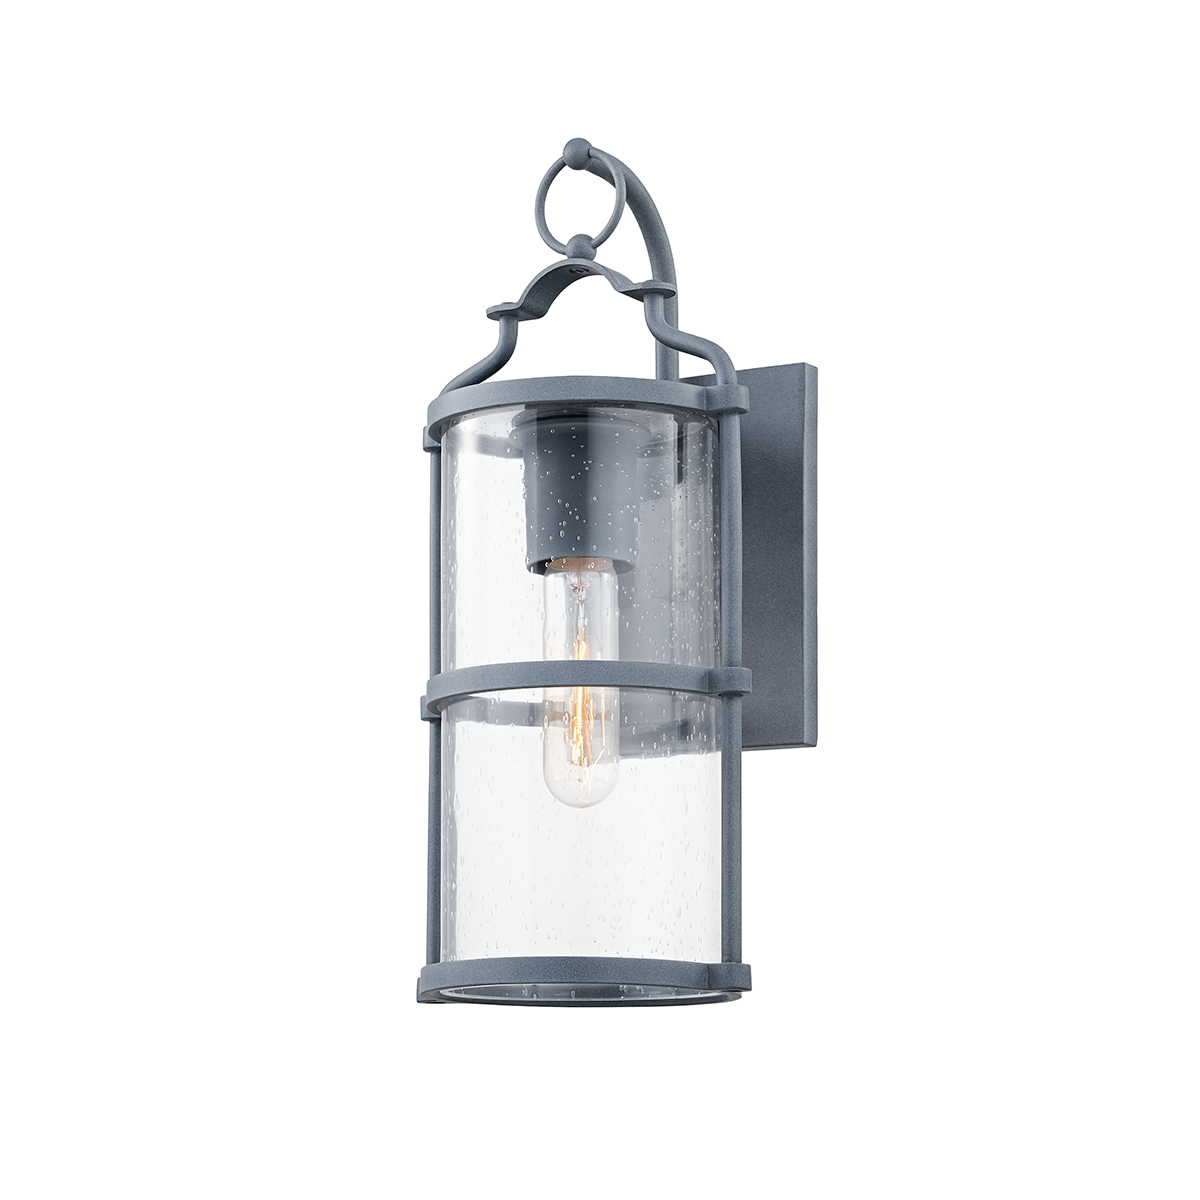 Troy Lighting 1 LIGHT SMALL EXTERIOR WALL SCONCE B1311 Outdoor l Wall Troy Lighting WEATHERED ZINC  